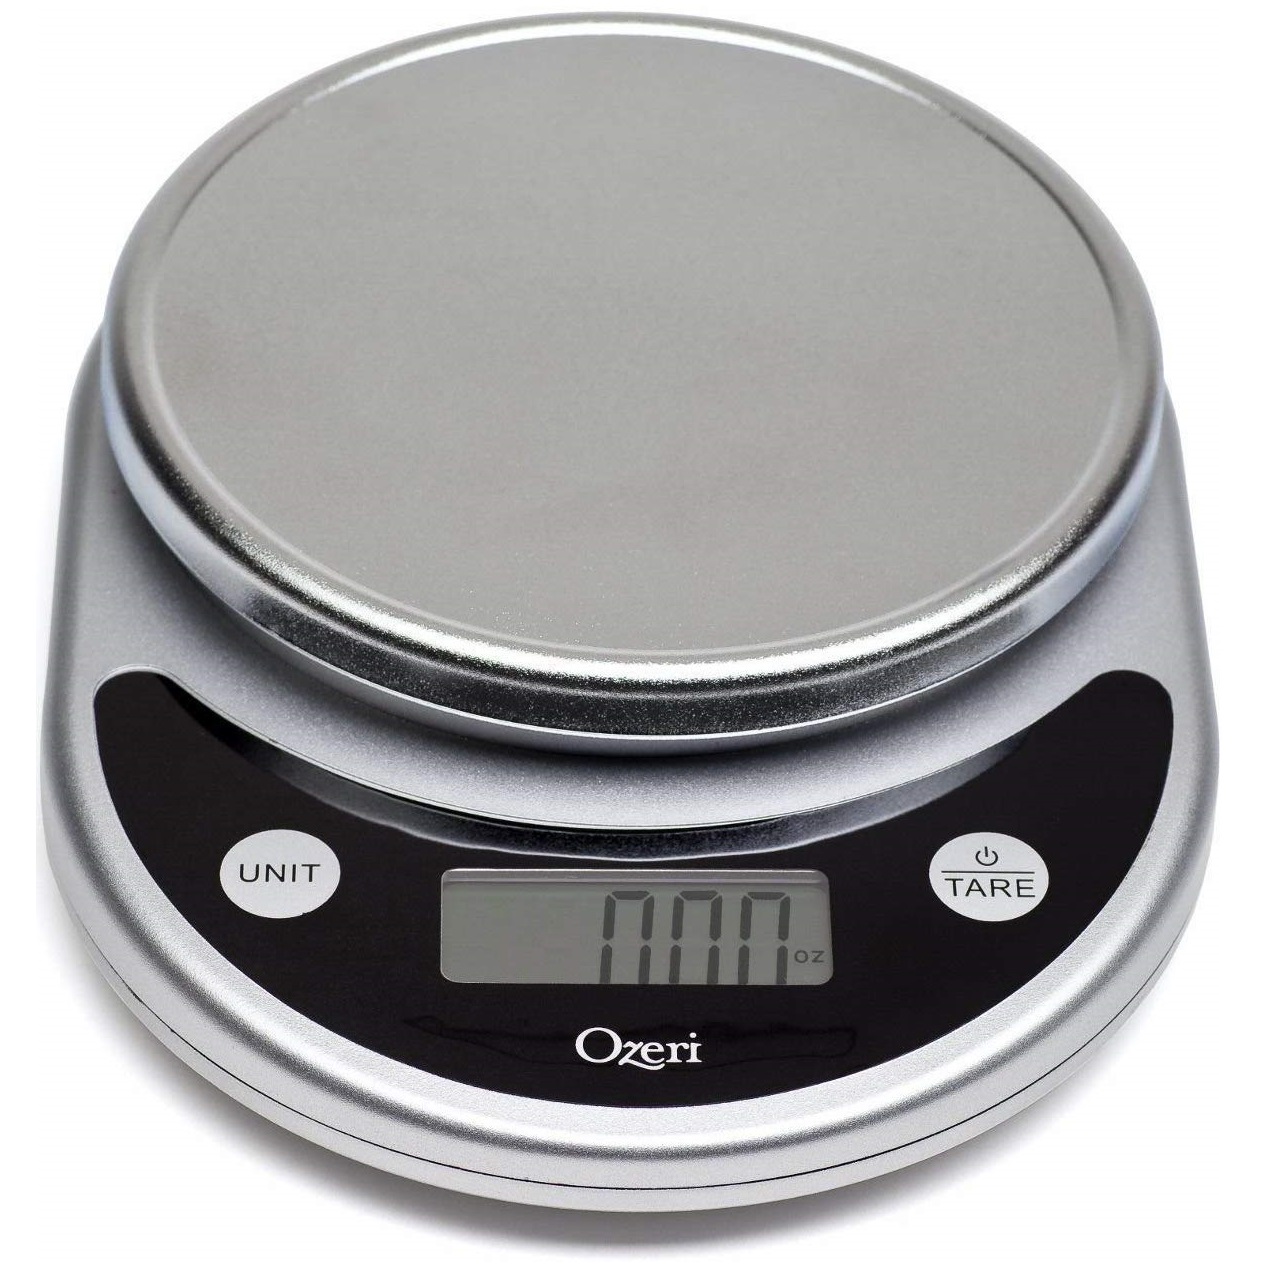 KS1510 Kitchen Food Scale Digital Stainless Steel 11 LB Capacity by Harlyn